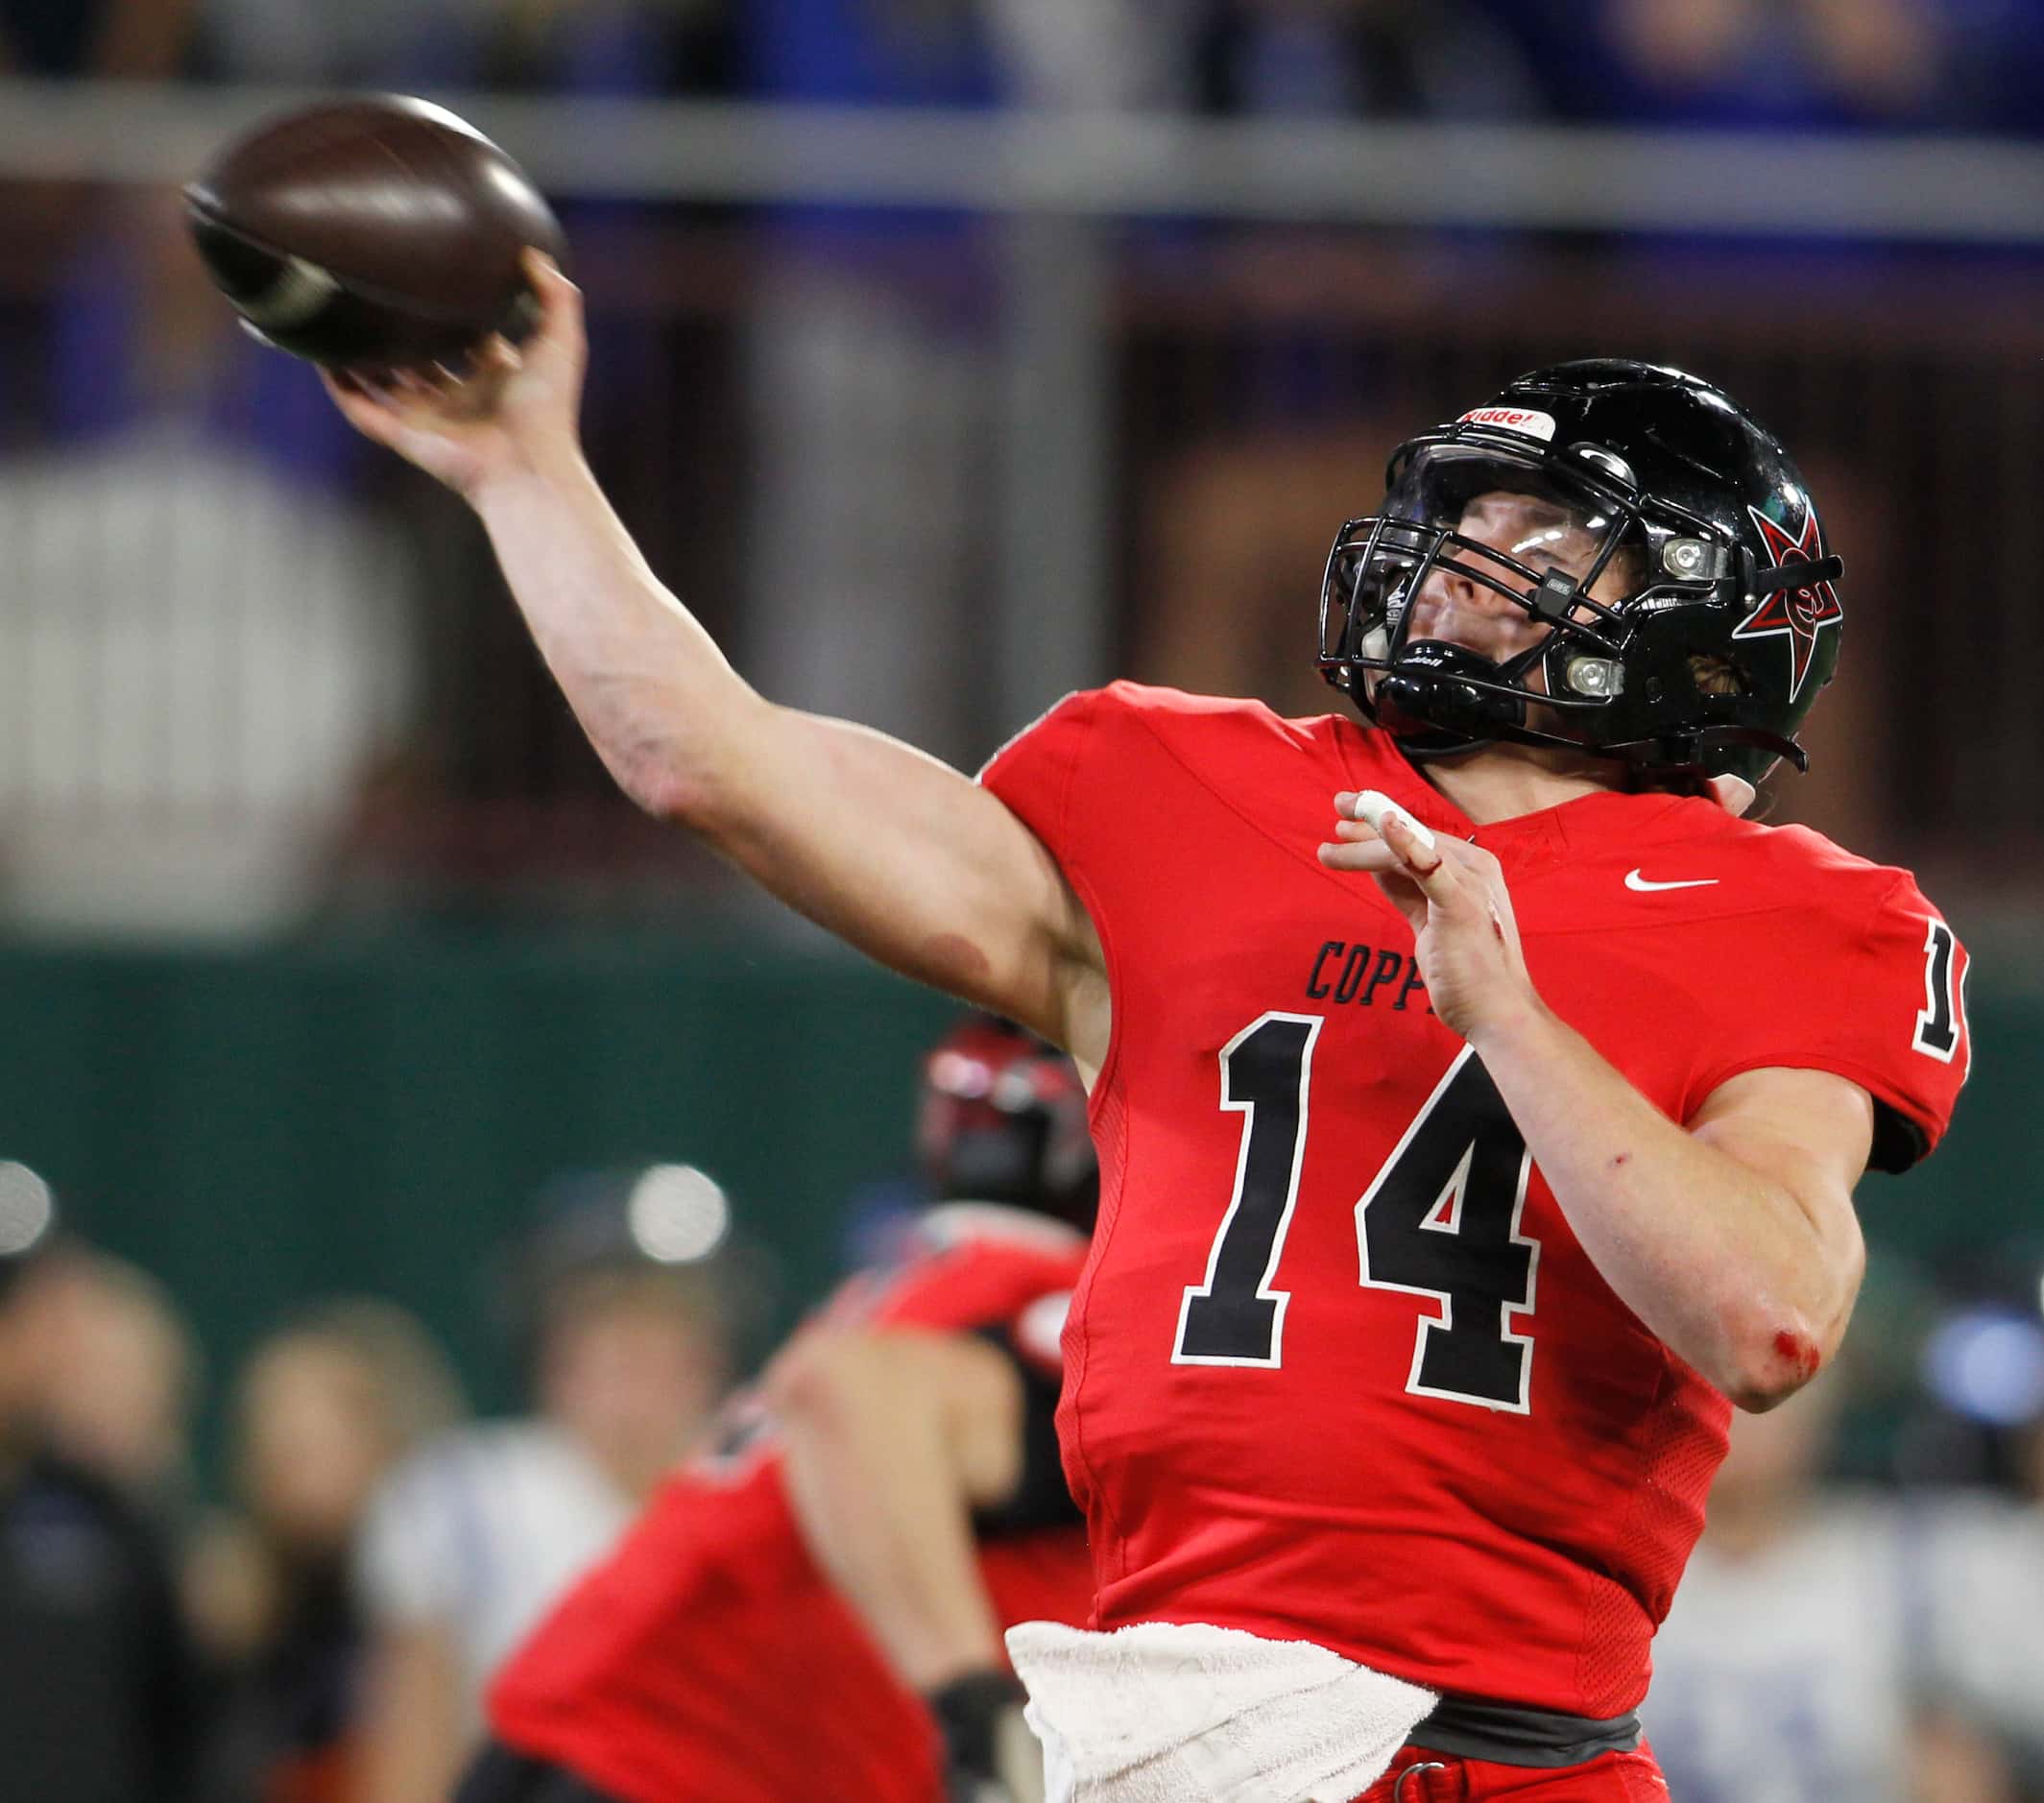 Coppell quarterback edward Griffin (14) launches a touchdown pass during the 4th quarter of...